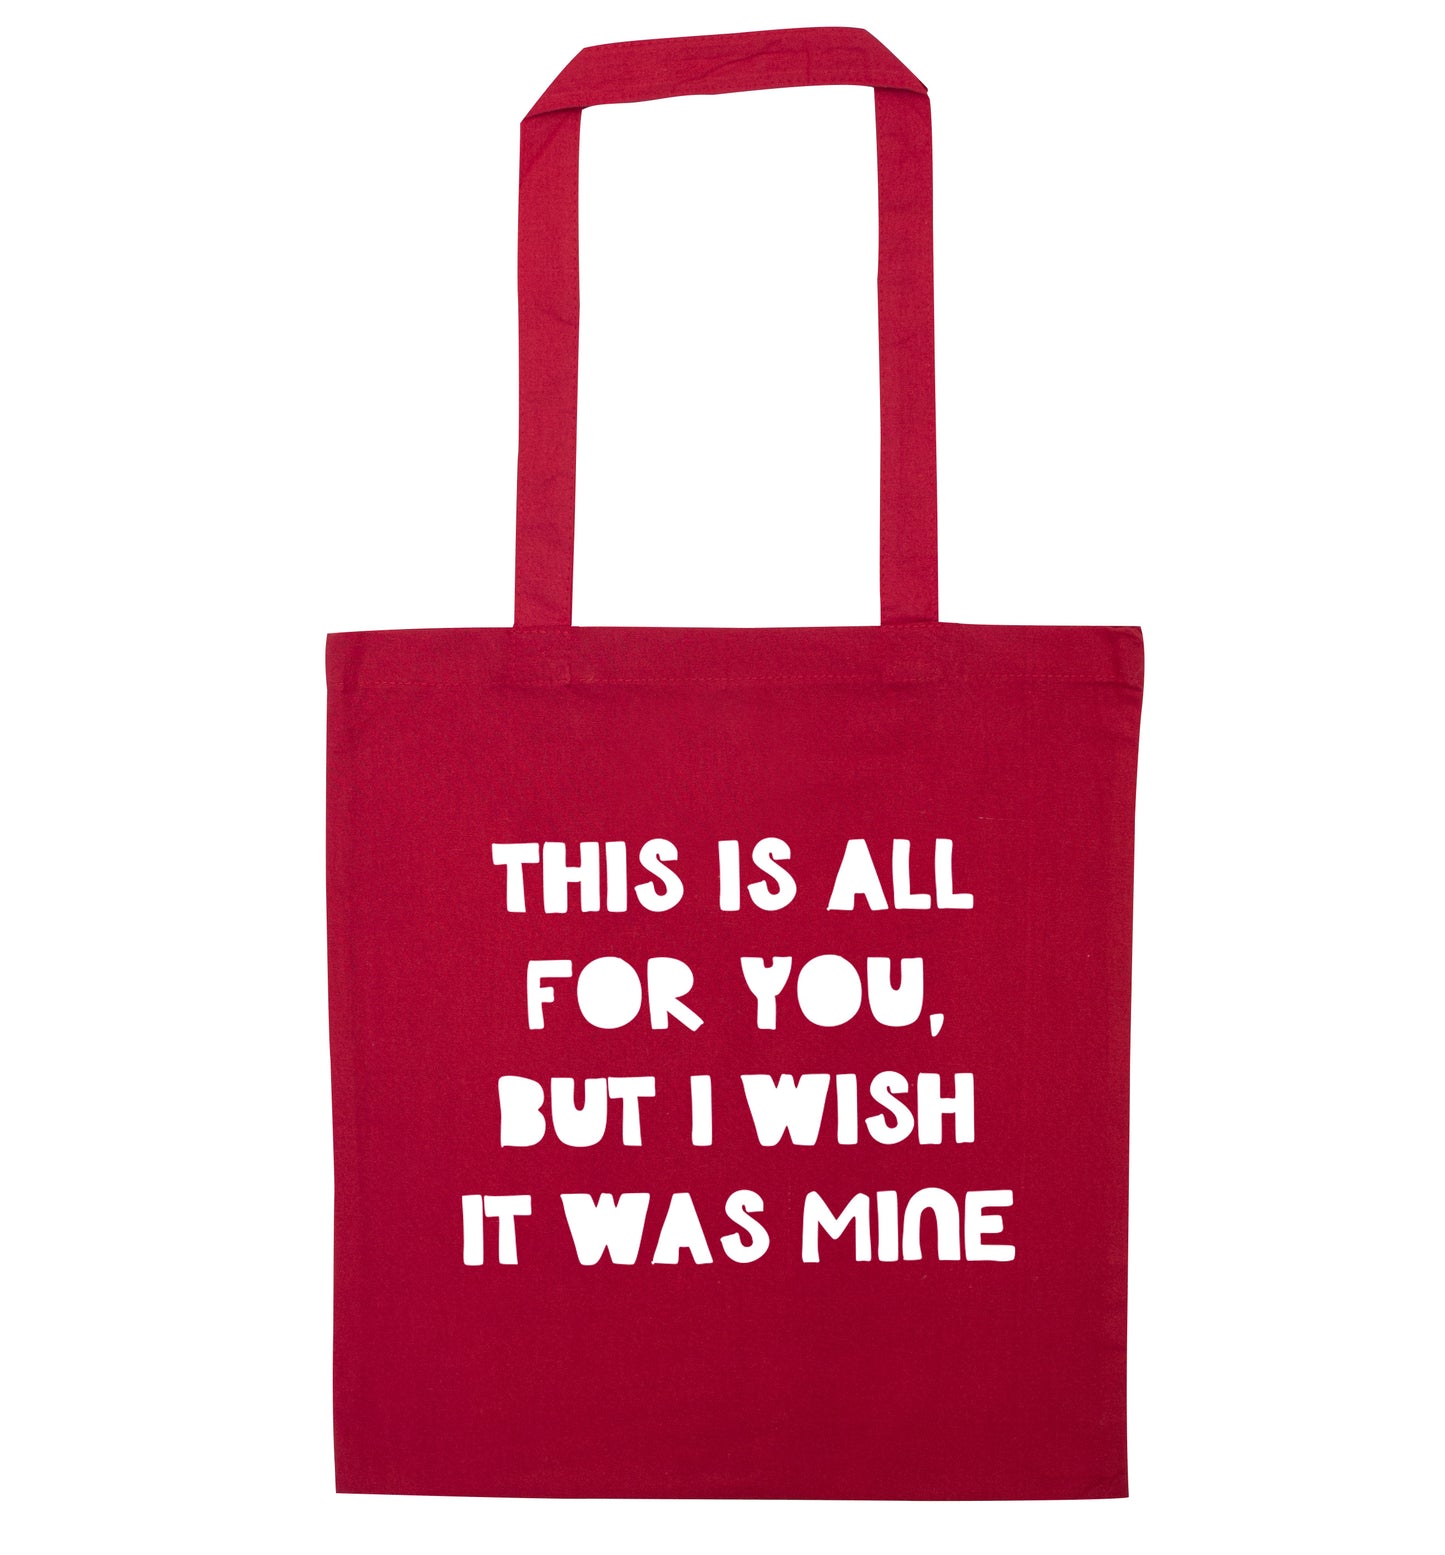 This is all for you but I wish it was mine red tote bag